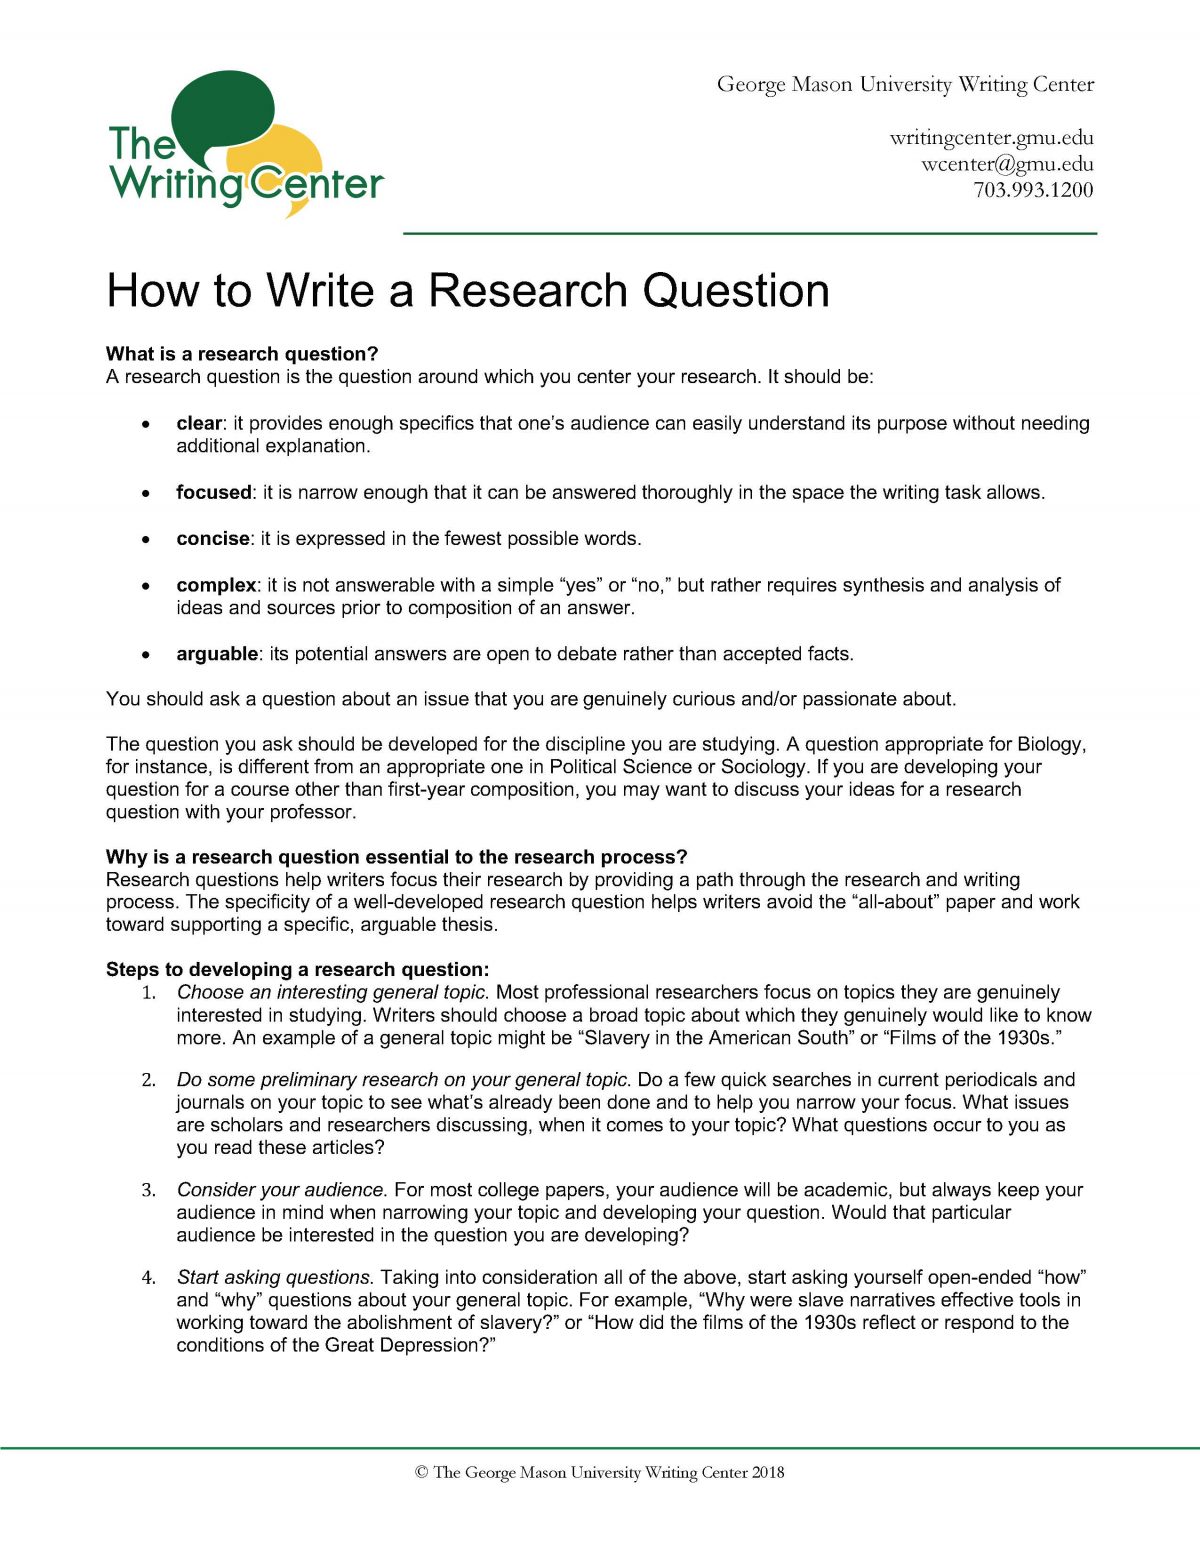 questions to ask when doing a research paper